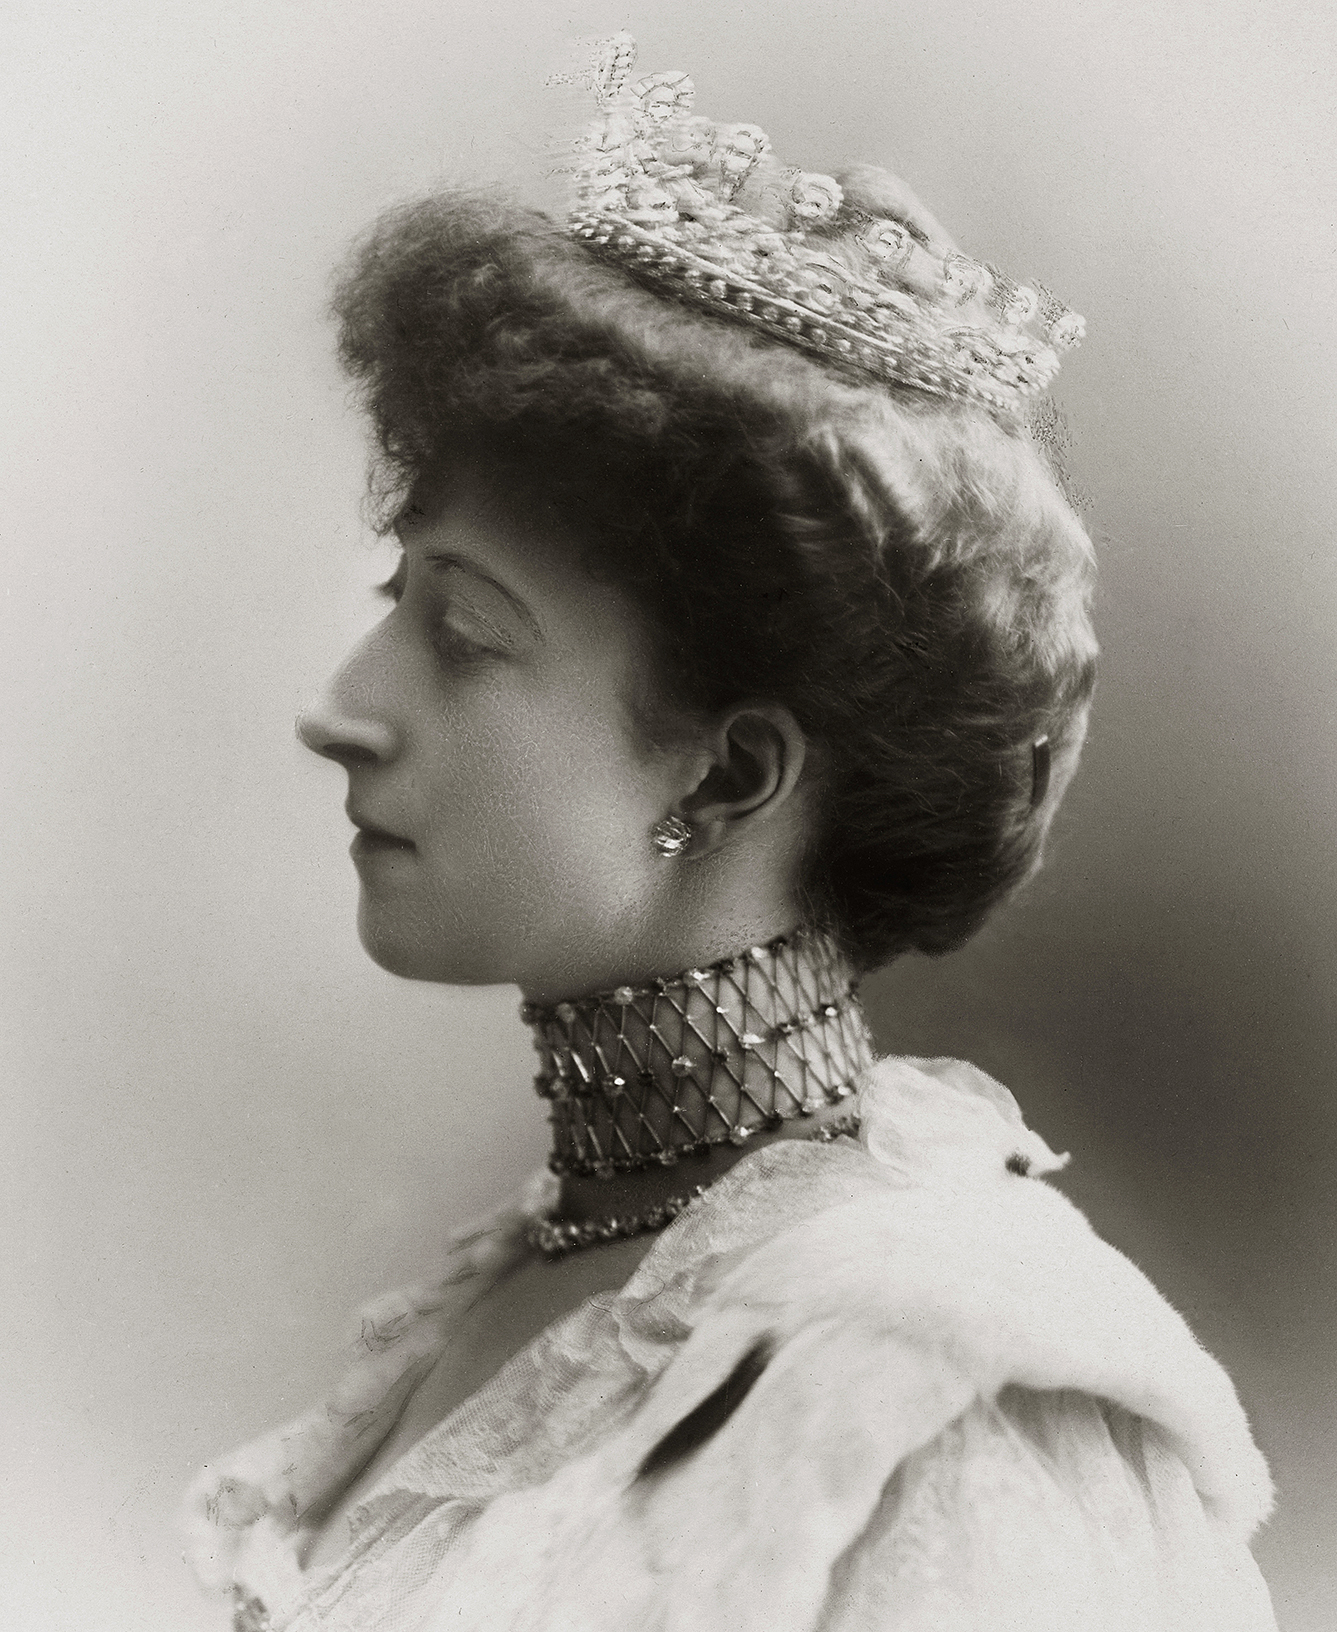 Queen Maud 1906 (The Royal Court, Archives)